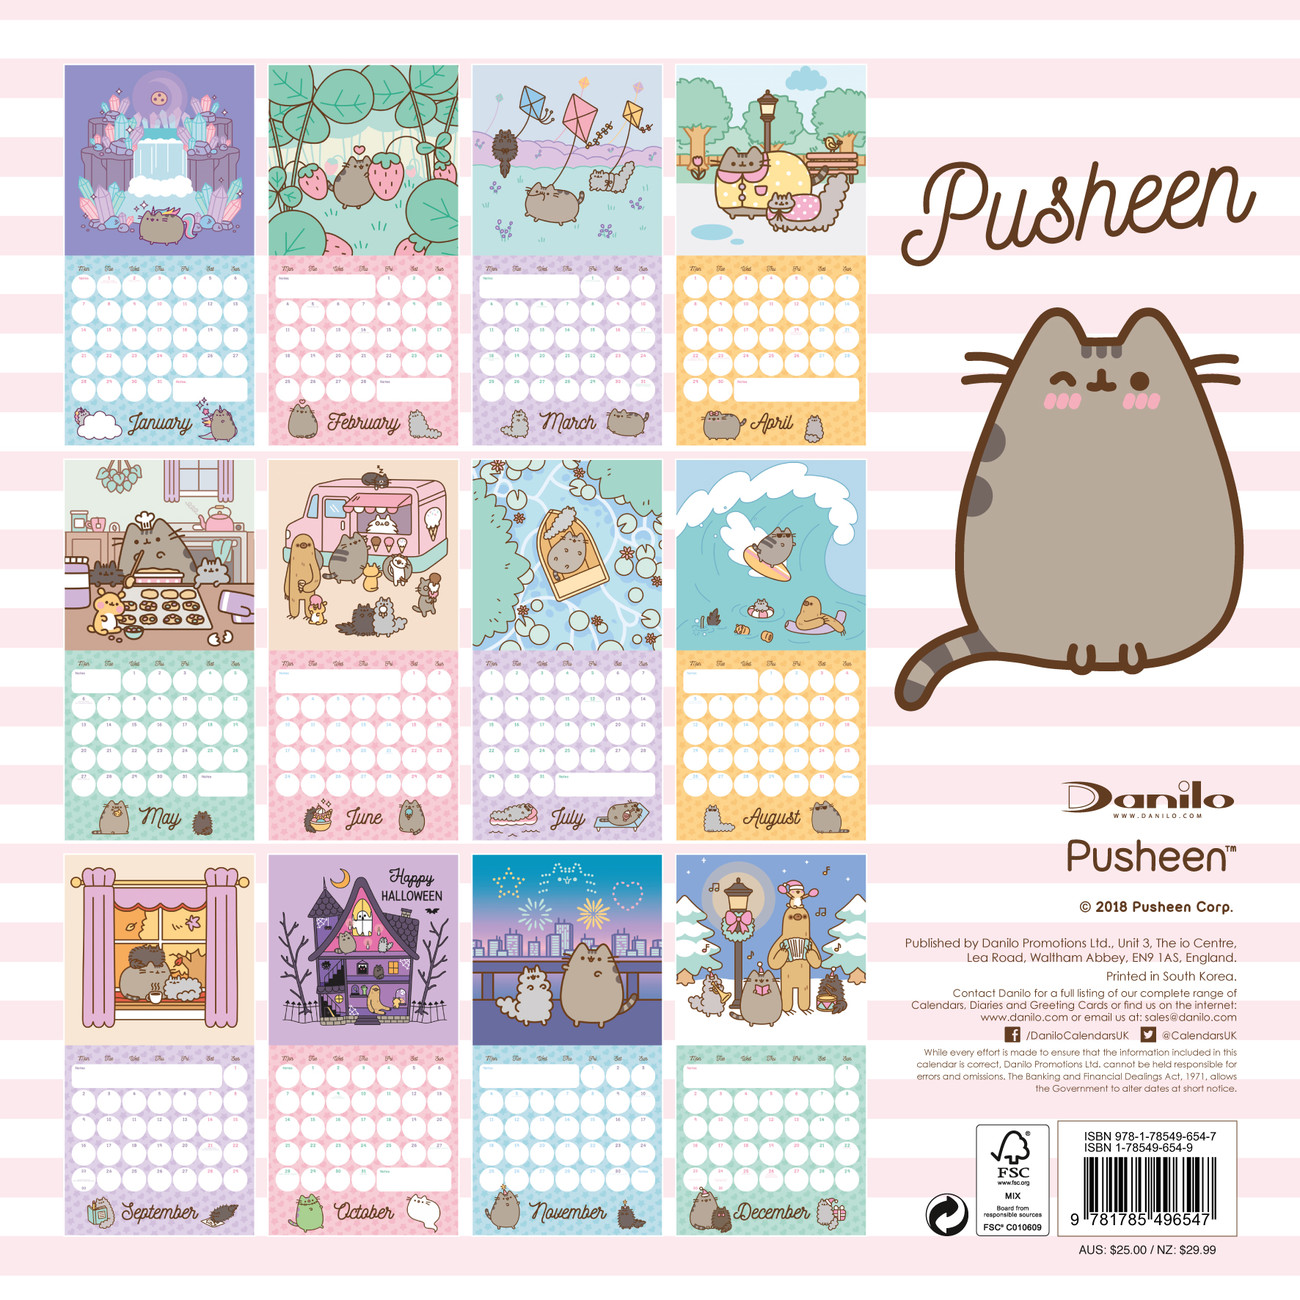 Pusheen - Calendars 2021 on UKposters/EuroPosters